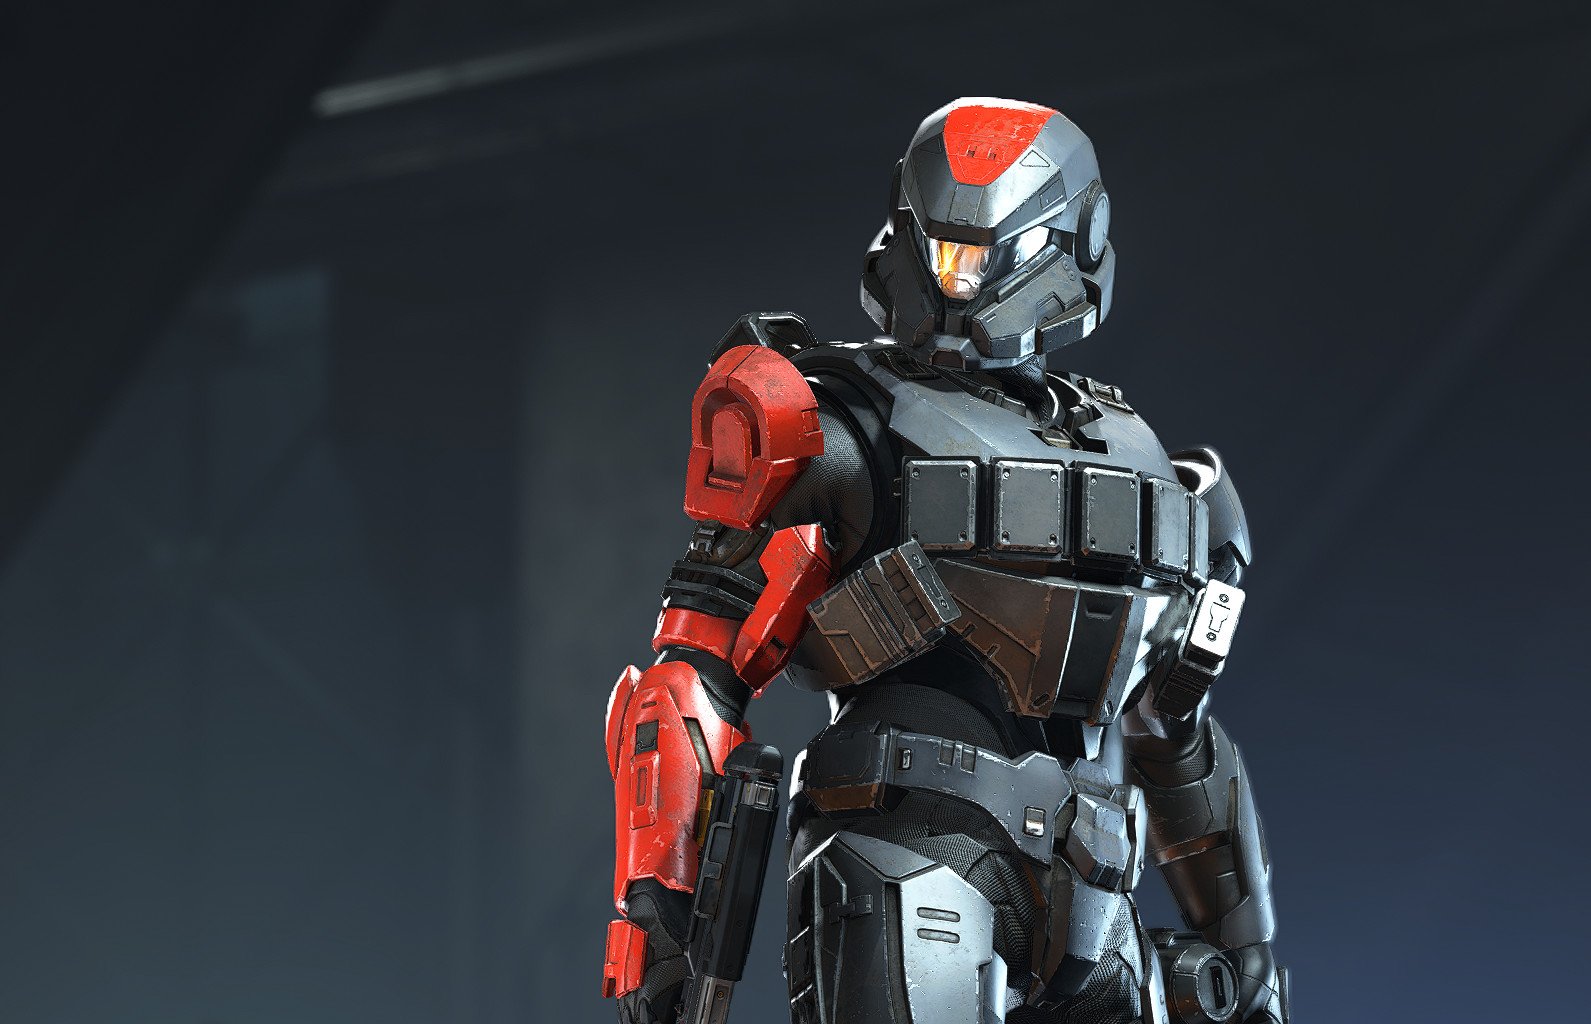 Halo 5: Guardians - How to Unlock Multiplayer Armor Sets